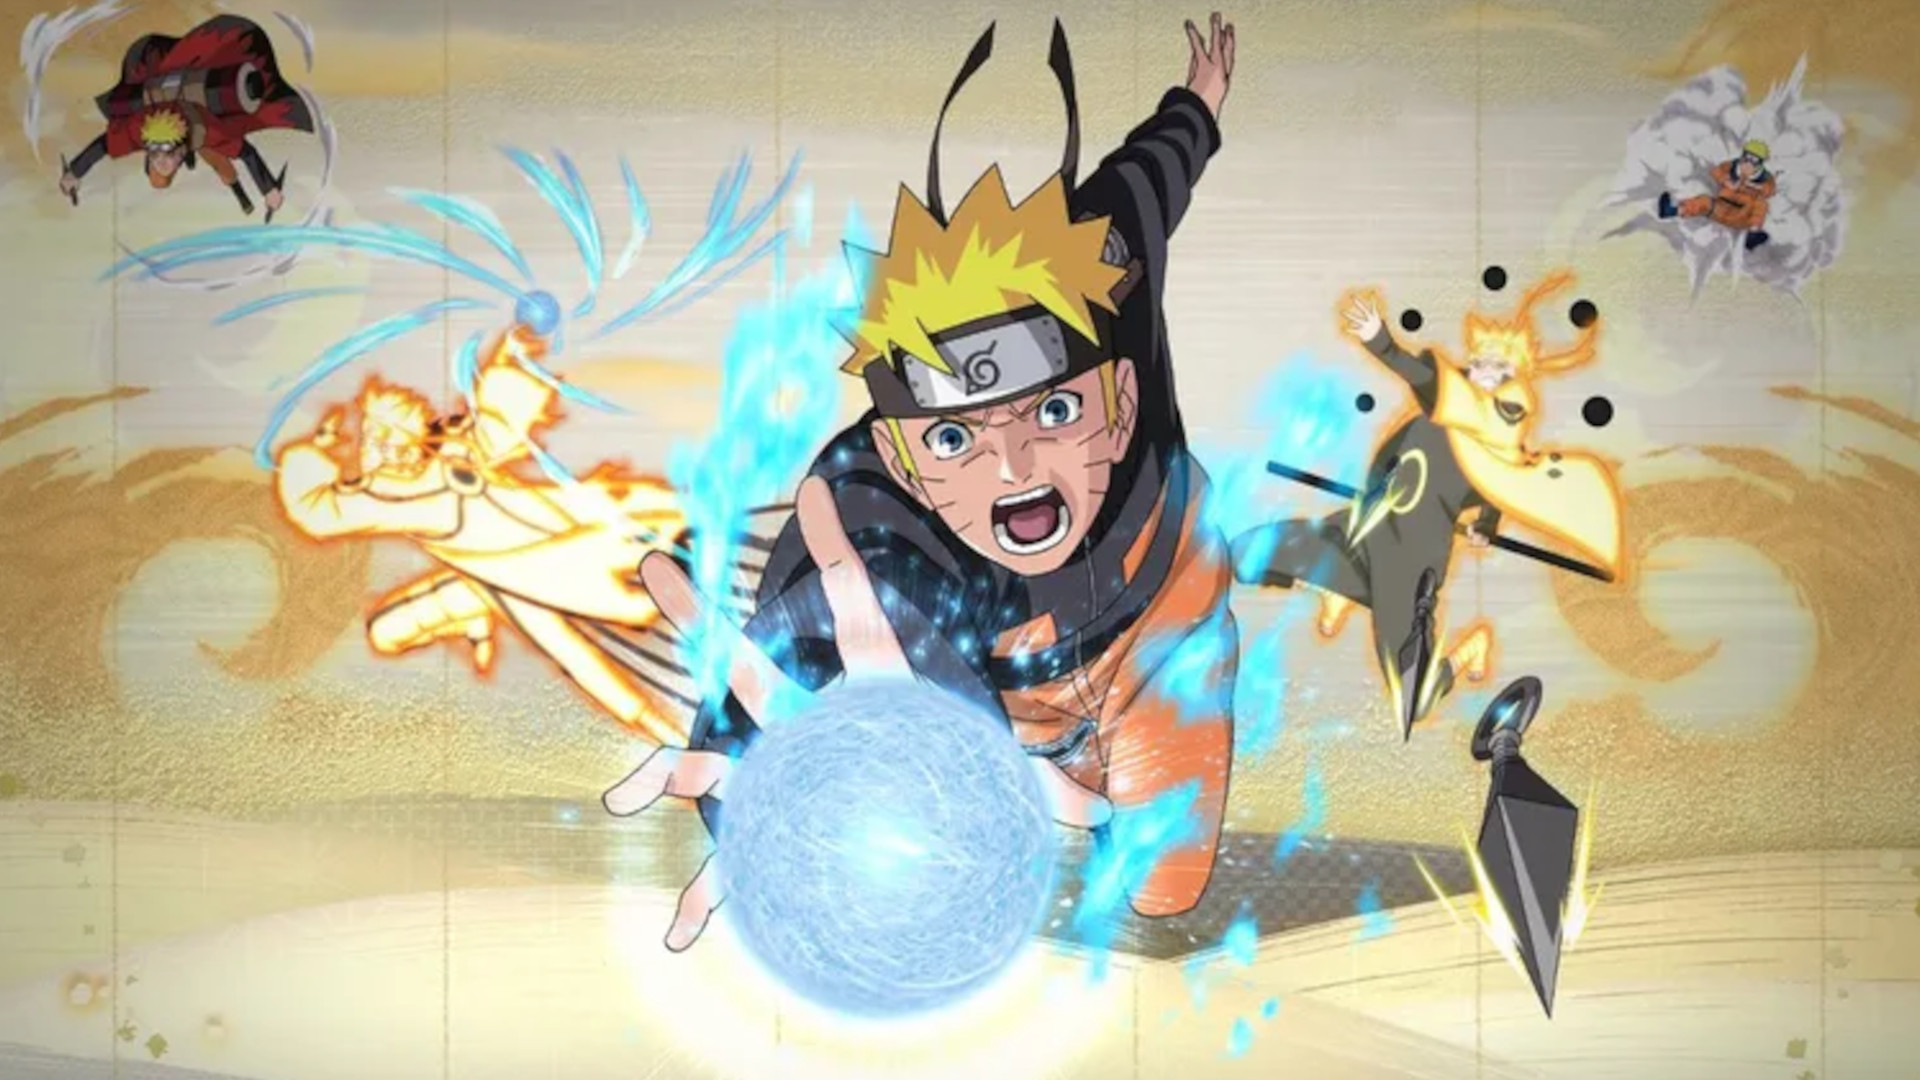 the-naruto-ultimate-ninja-storm-connections-release-date-has-arrived